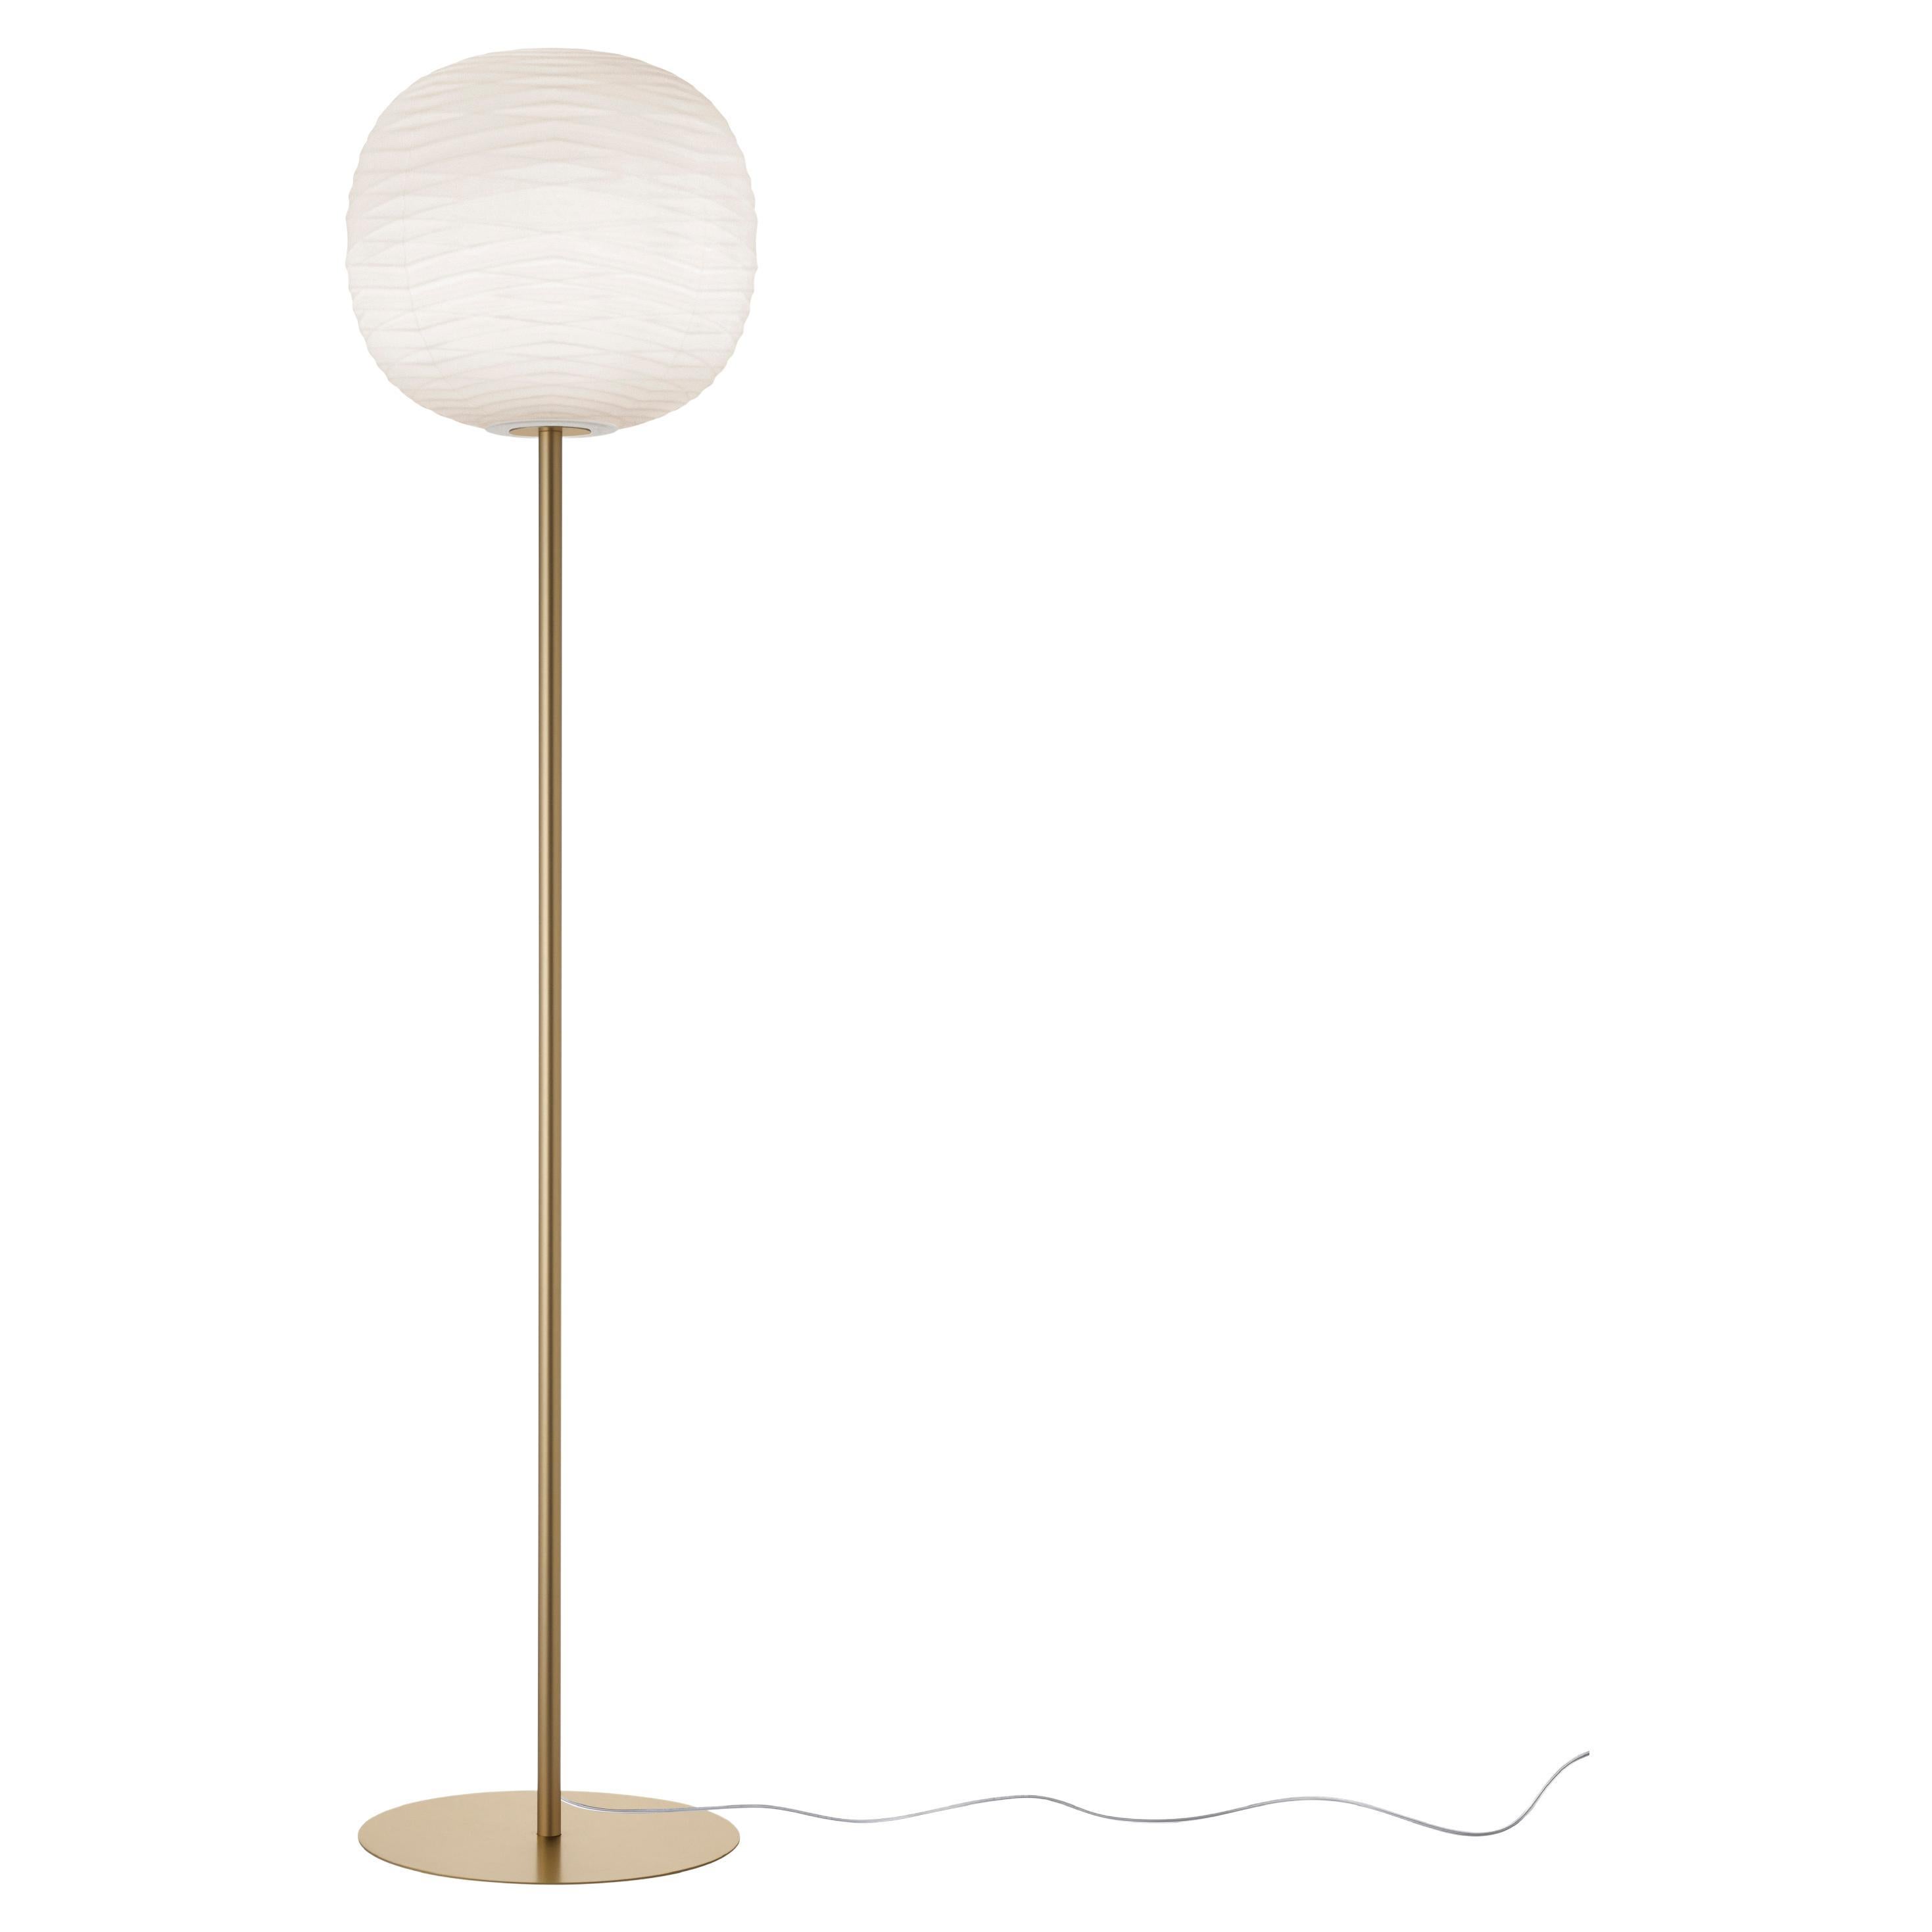 Foscarini Gem Floor Lamp by Ludovica and Roberto Palomba For Sale